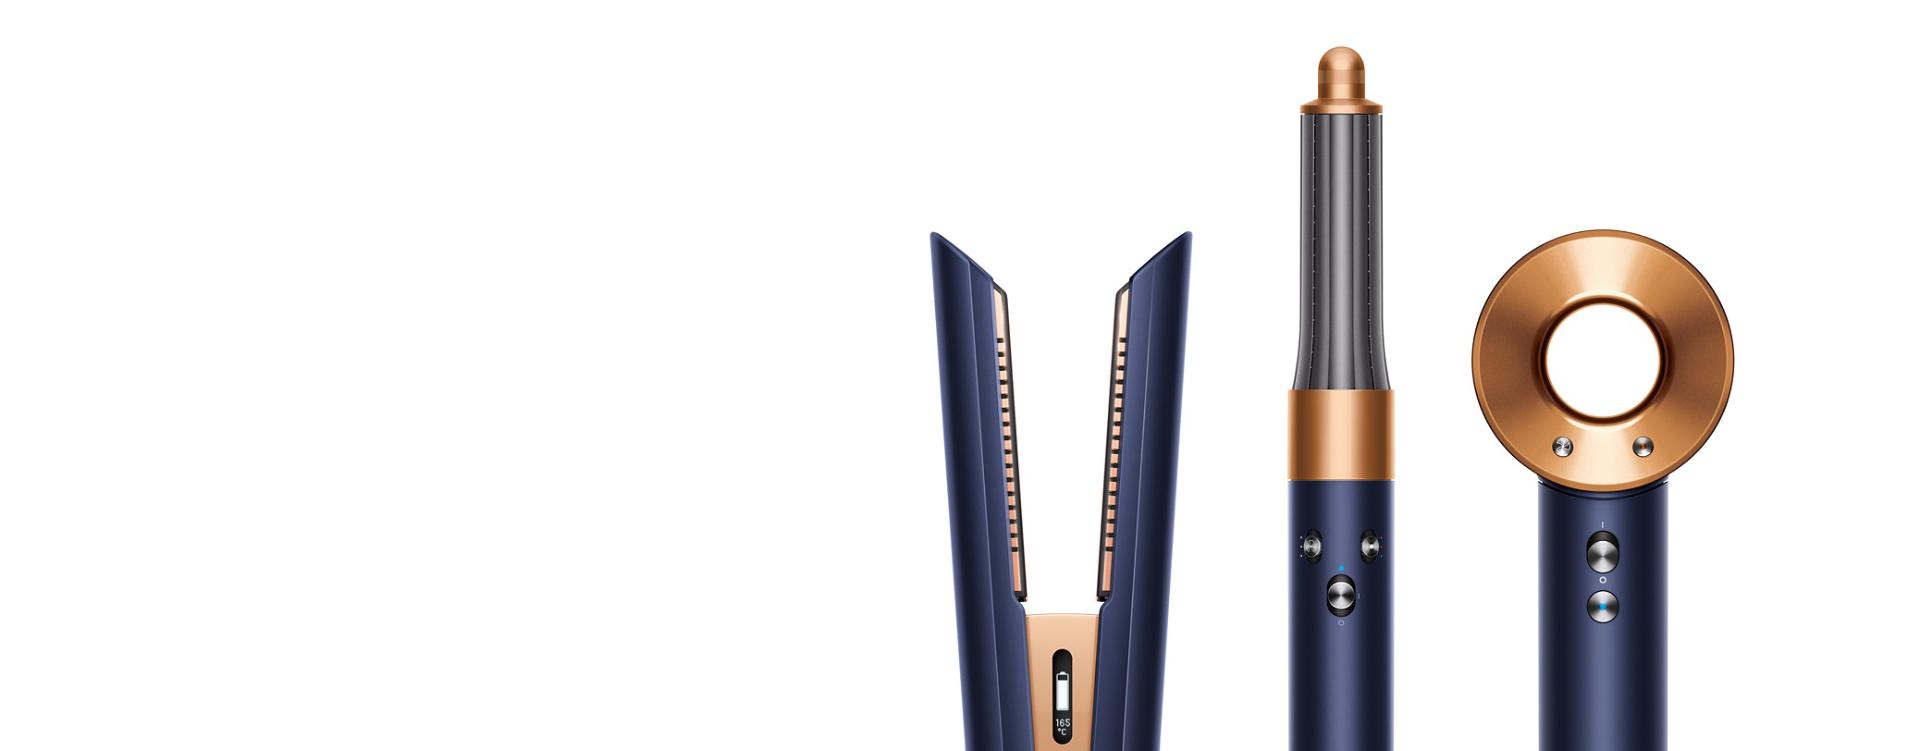 Dyson Corrale hair straightener, Dyson Airwrap multi-styler and Dyson Supersonic hair dryer